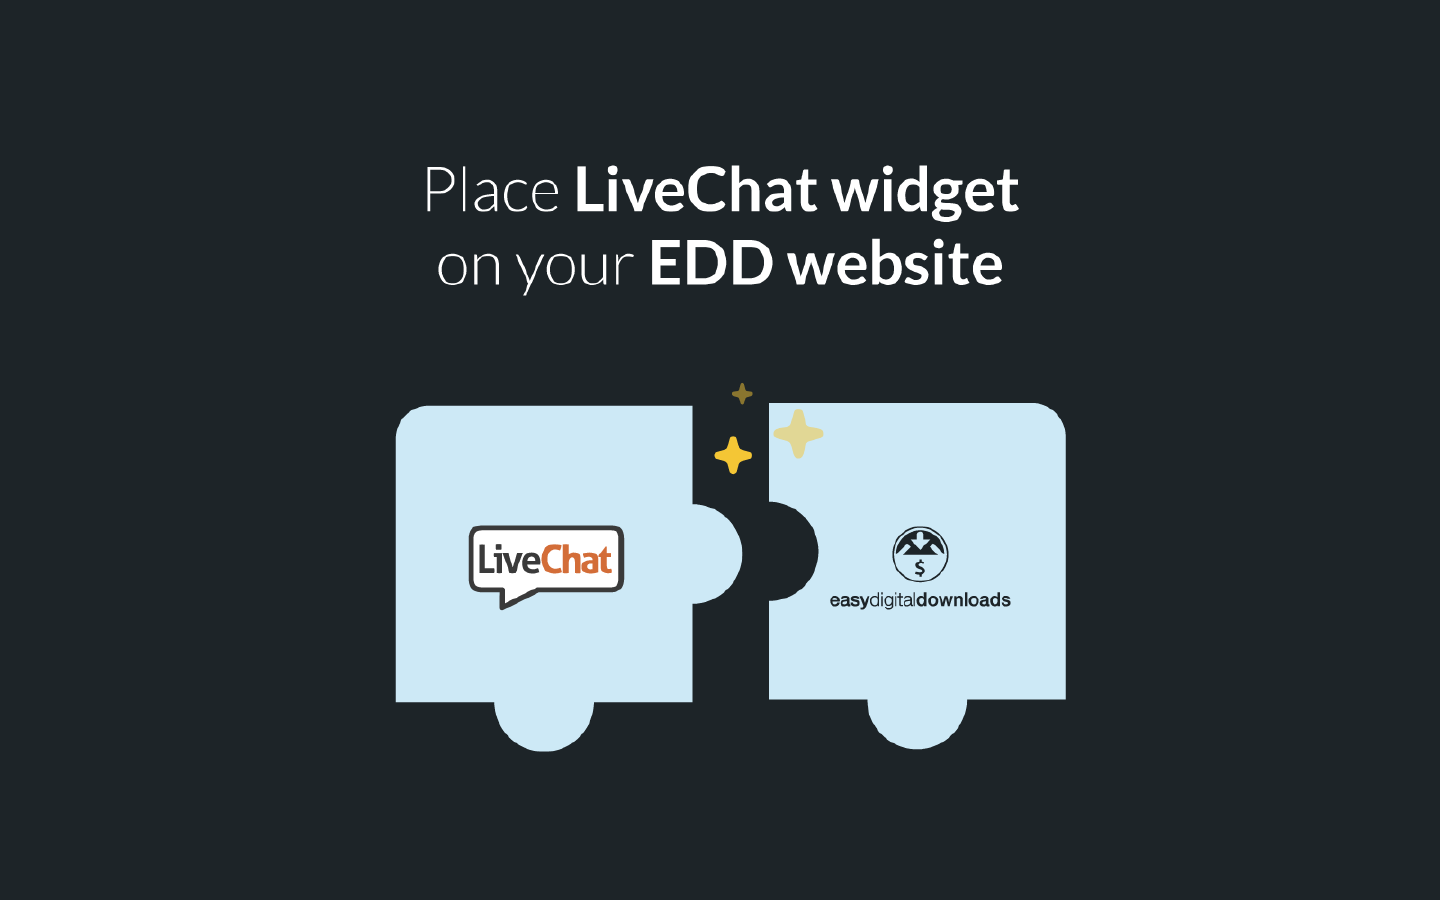 LiveChat integrates with EDD